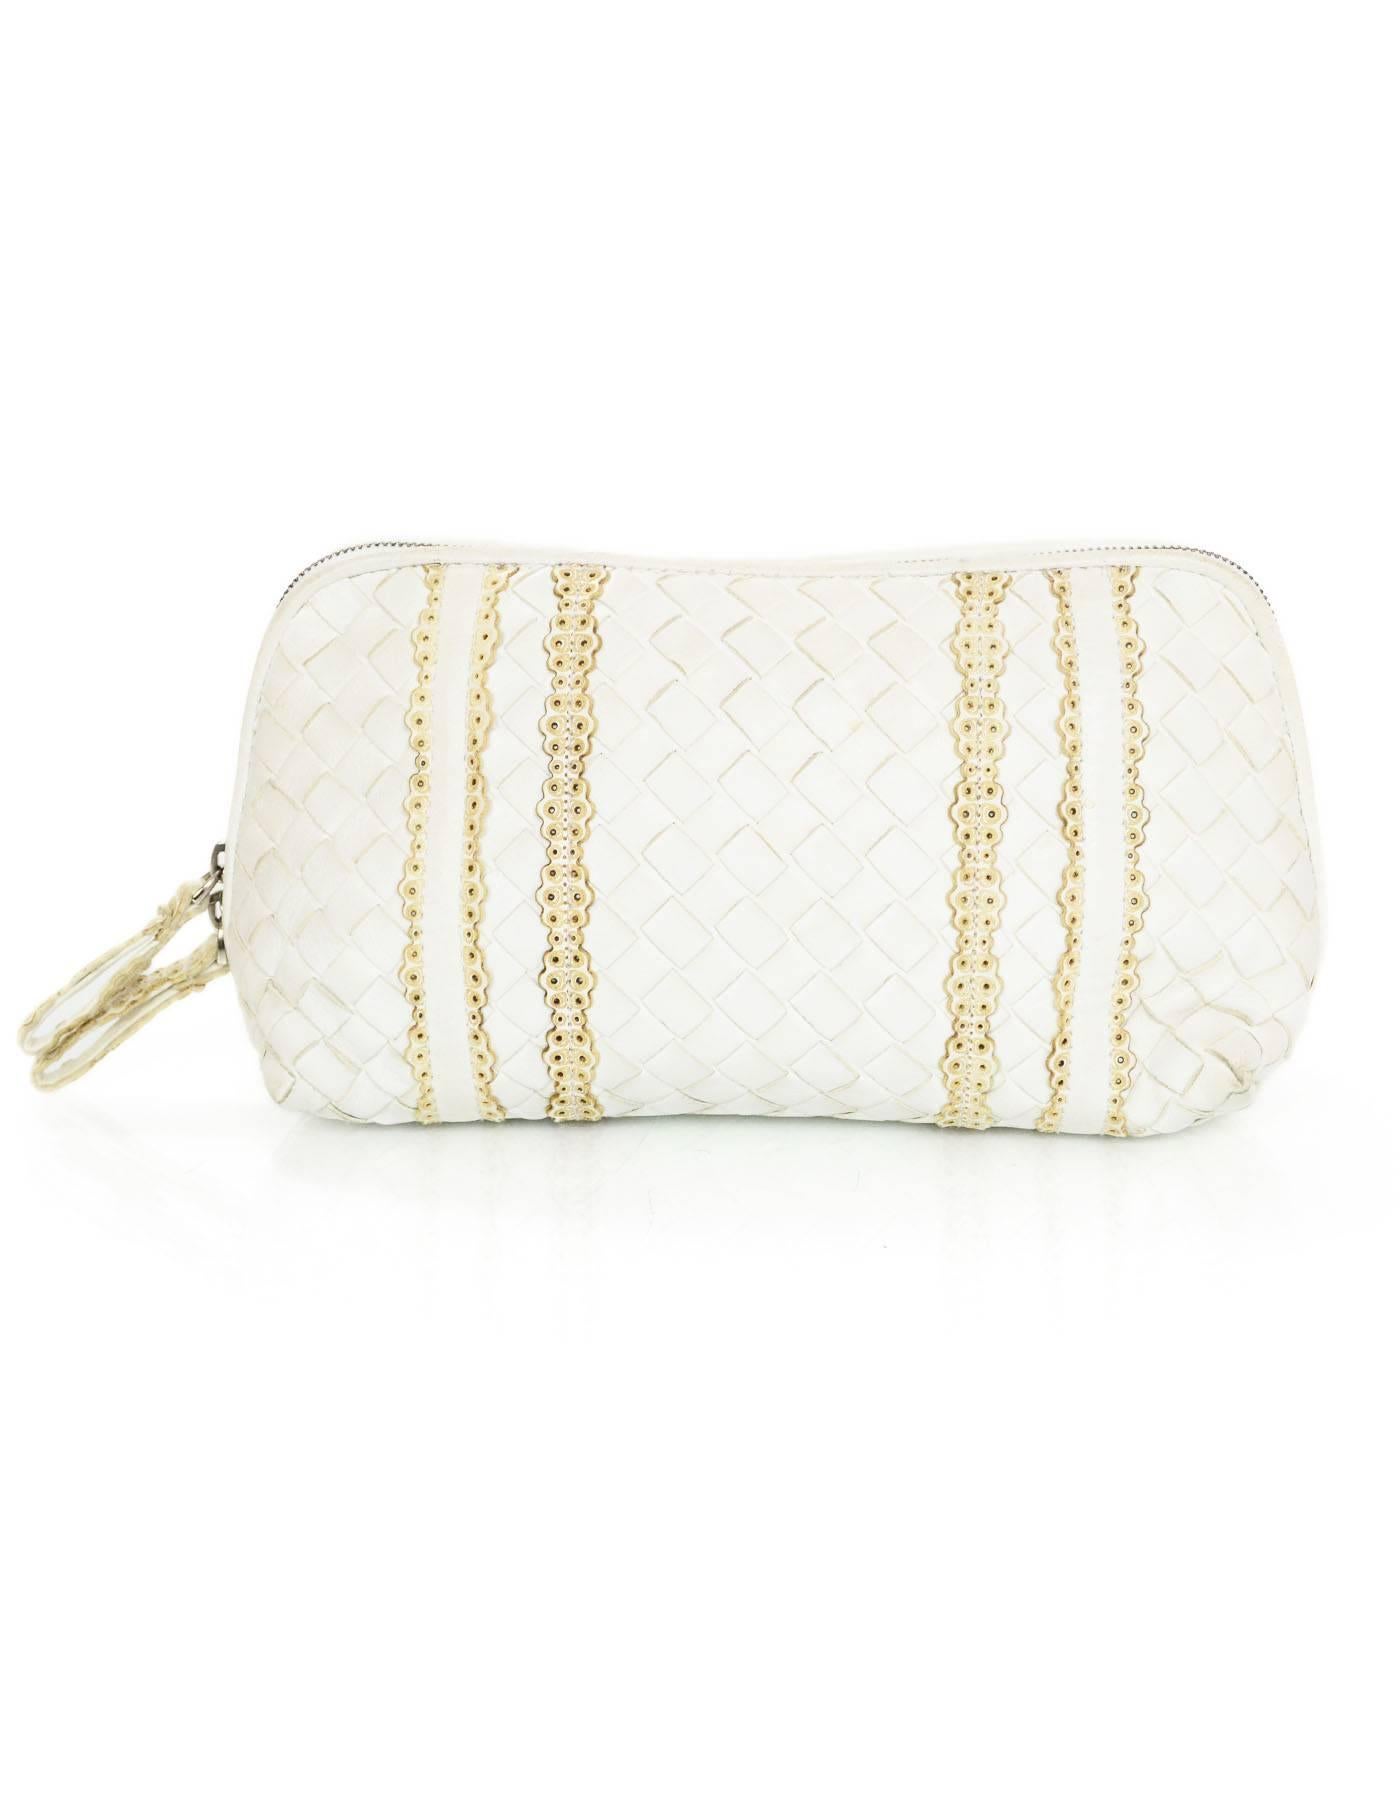 Bottega Veneta White Intrecciato Cosmetic Bag
Features perforated leather trim

Made In: Italy
Color: White, tan
Hardware: Silvertone zipper
Materials: Leather, metal
Lining: Tan textile
Closure/Opening: Double zip top
Overall Condition: Very good